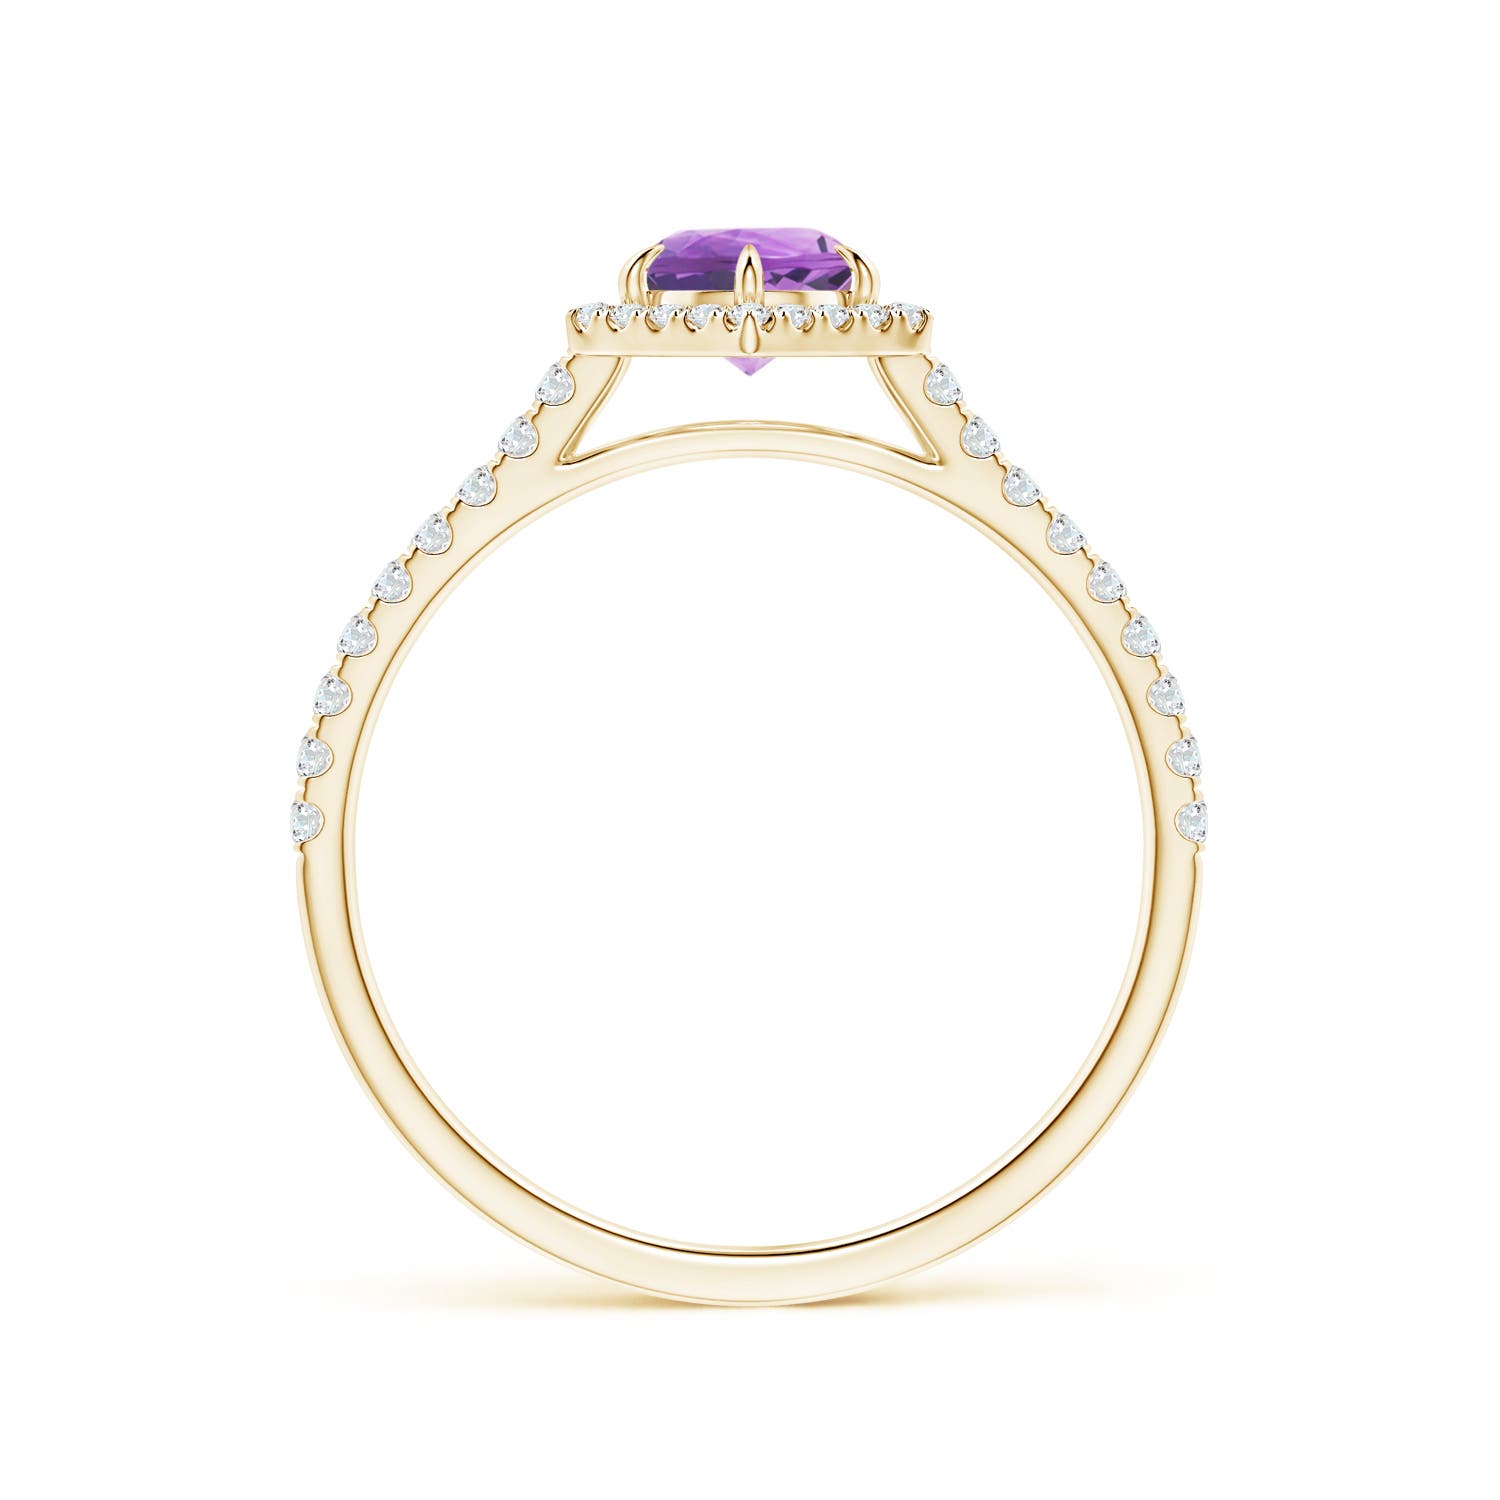 A - Amethyst / 0.71 CT / 14 KT Yellow Gold